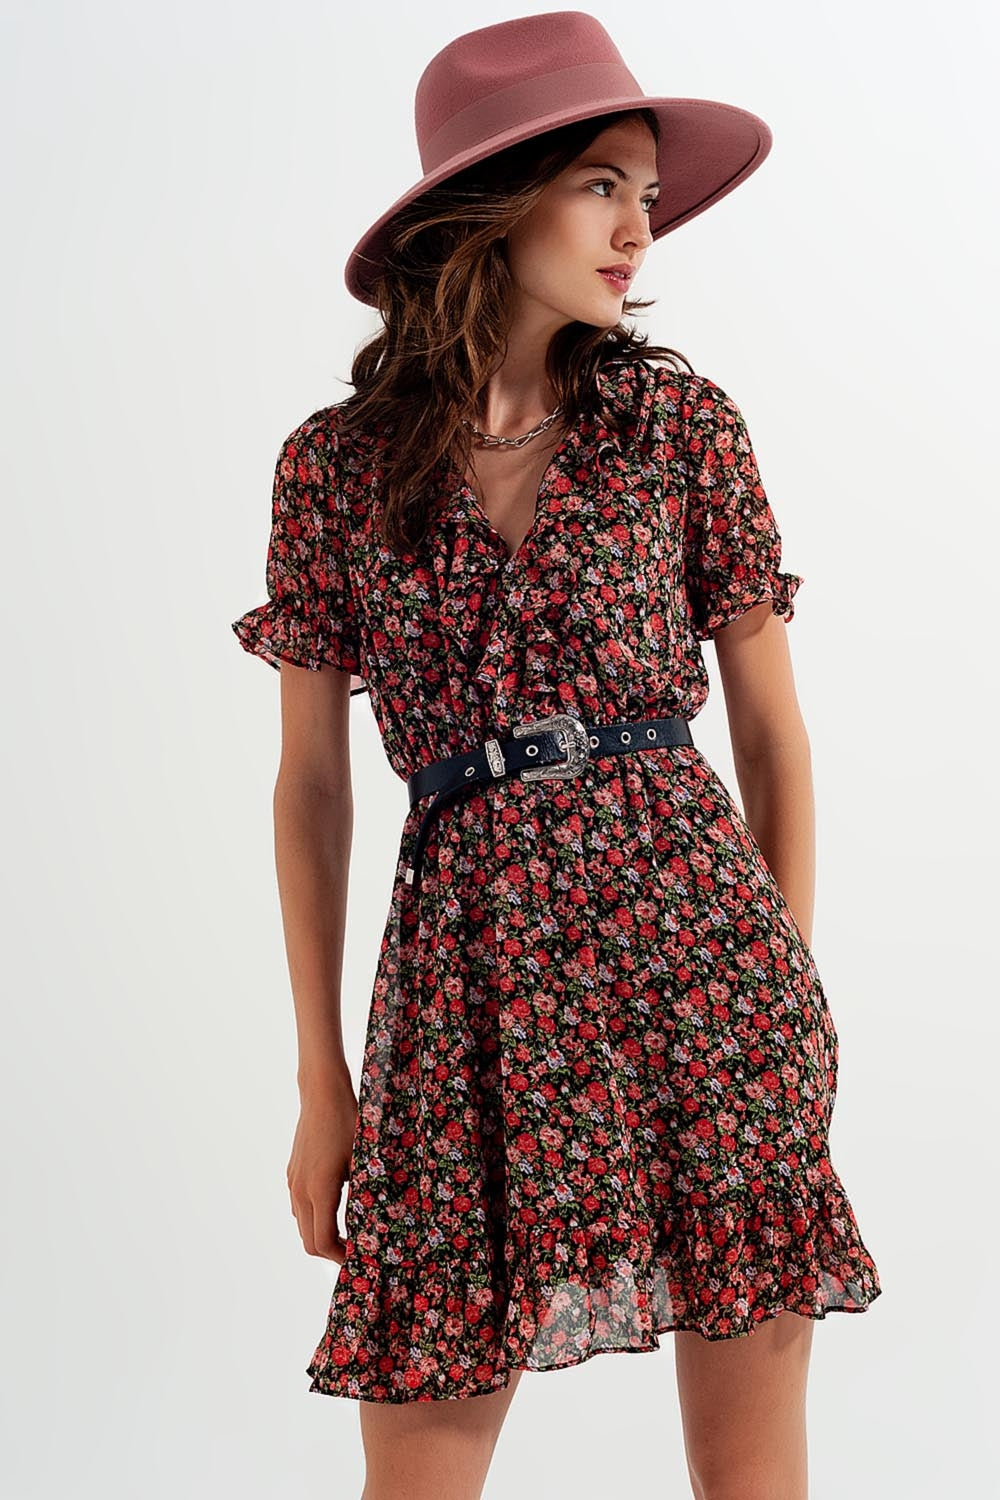 Chiffon Dress With Keyhole Back in Black Floral